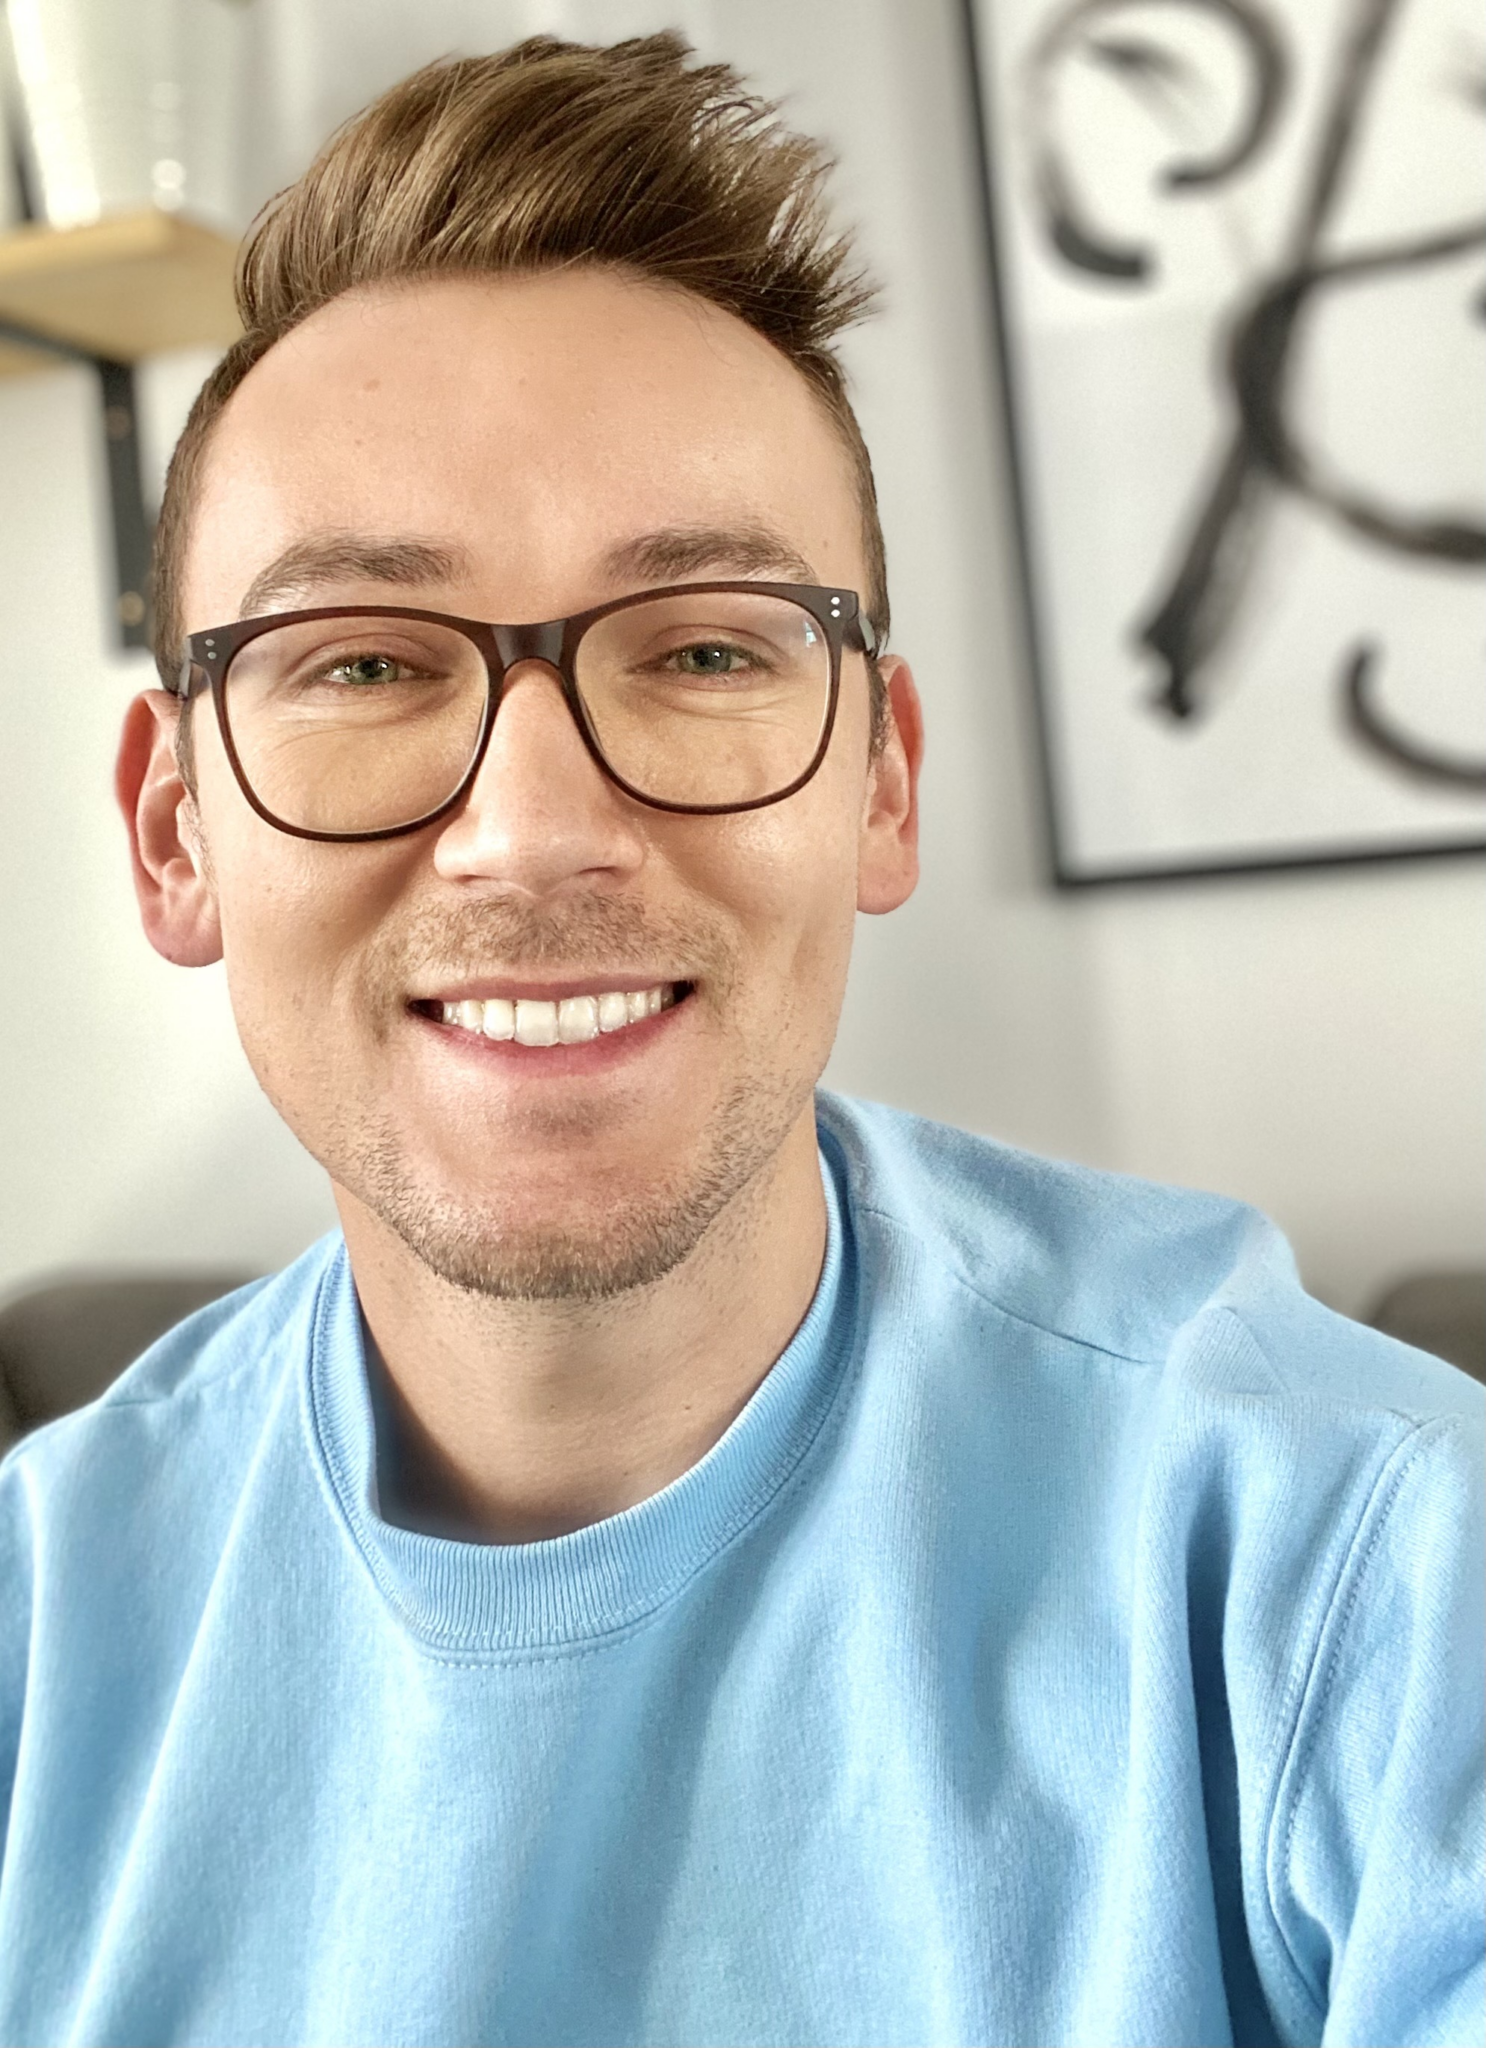 Picture of Kenan Karalic, Web Administrator. A man with light brown hair and brown framed glasses looks at the camera, dressed in a blue sweatshirt. Behind him, framed art and a wooden shelf is visible.